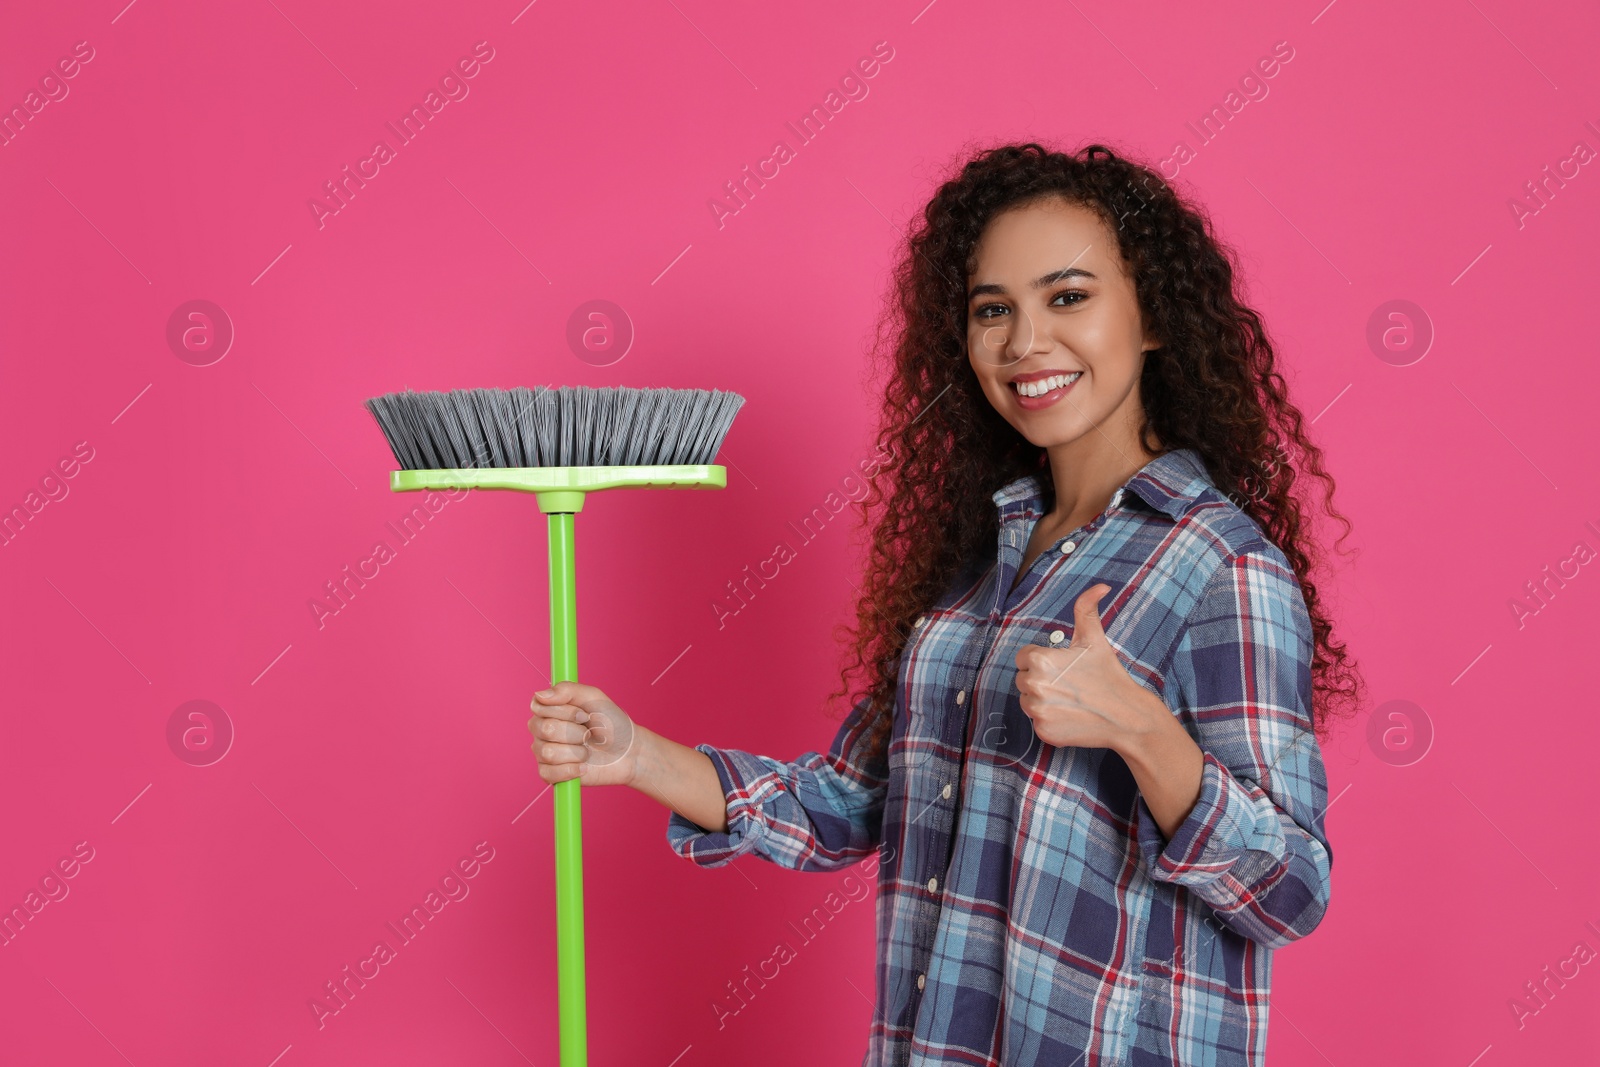 Photo of African American woman with green broom on pink background